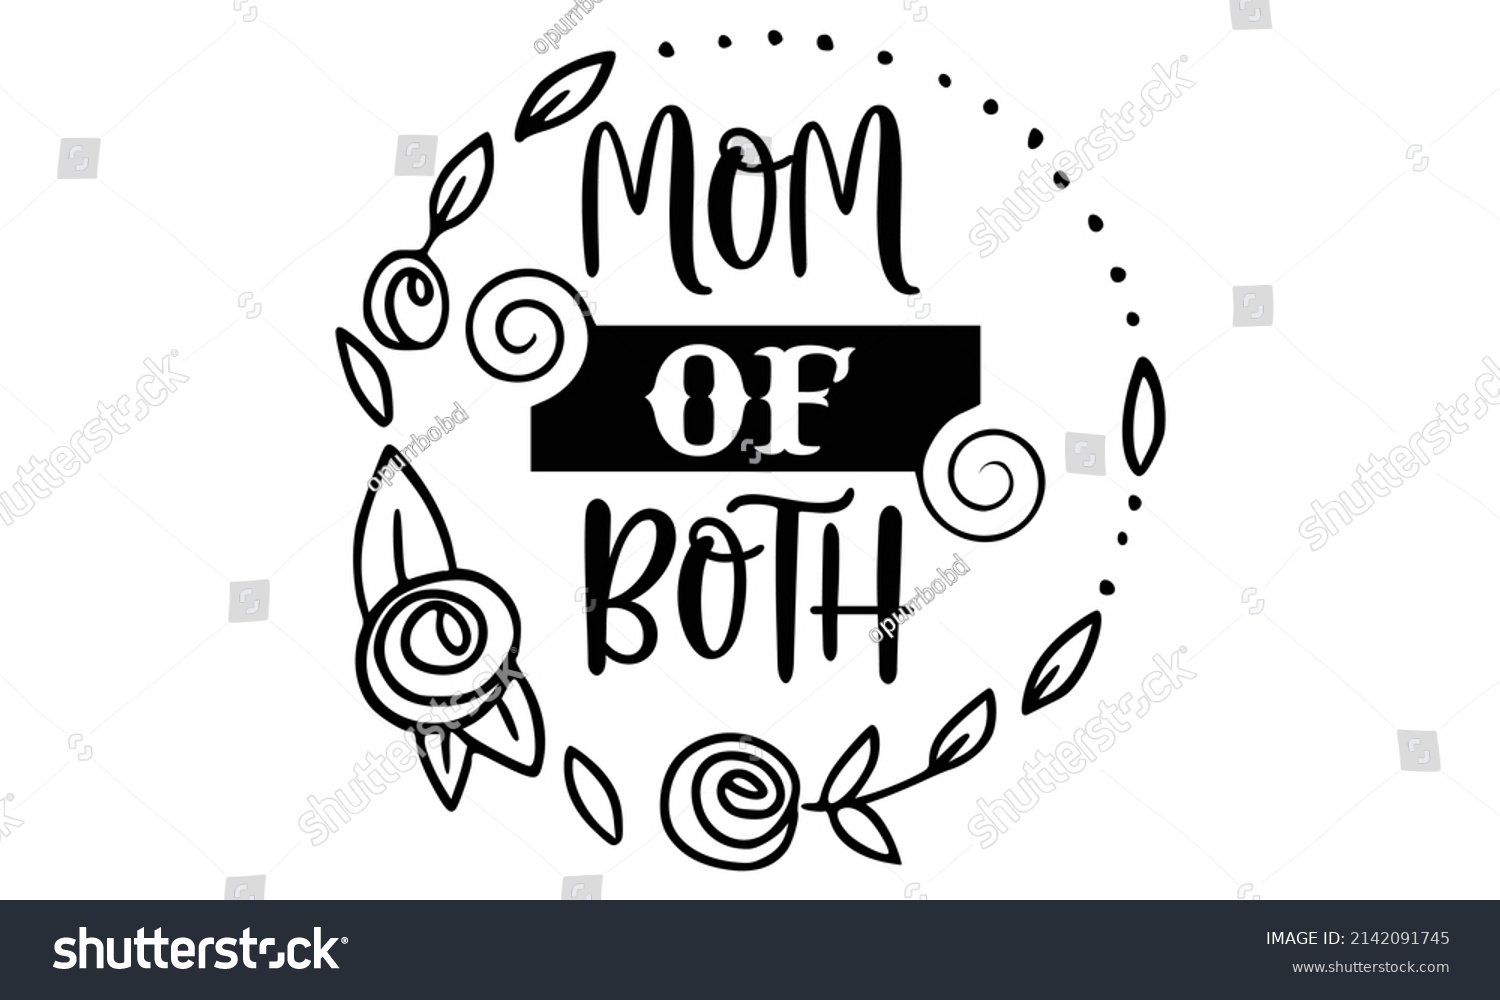 SVG of Mom of both- Mother's day t-shirt design, Hand drawn lettering phrase, Calligraphy t-shirt design, Isolated on white background, Handwritten vector sign, SVG, EPS 10 svg